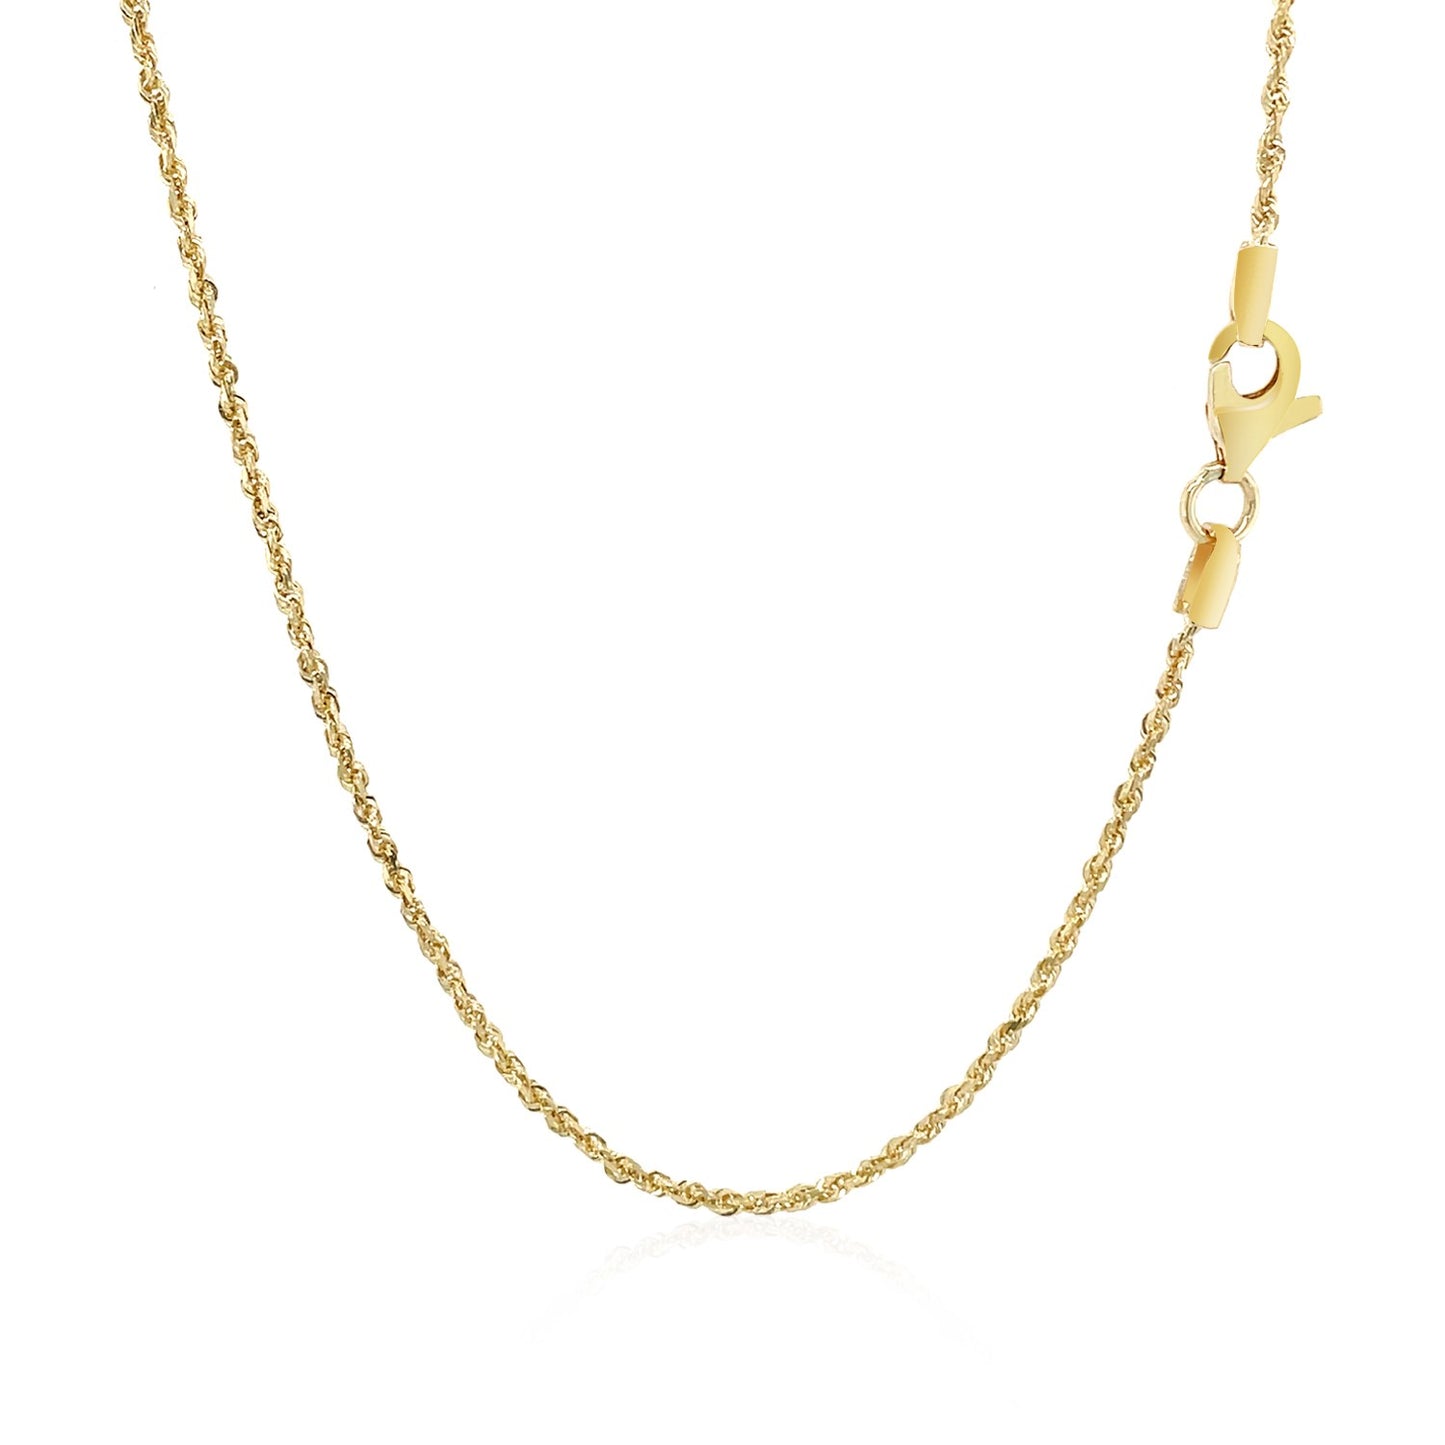 10k Yellow Gold Solid Diamond Cut Rope Chain 1.25mm